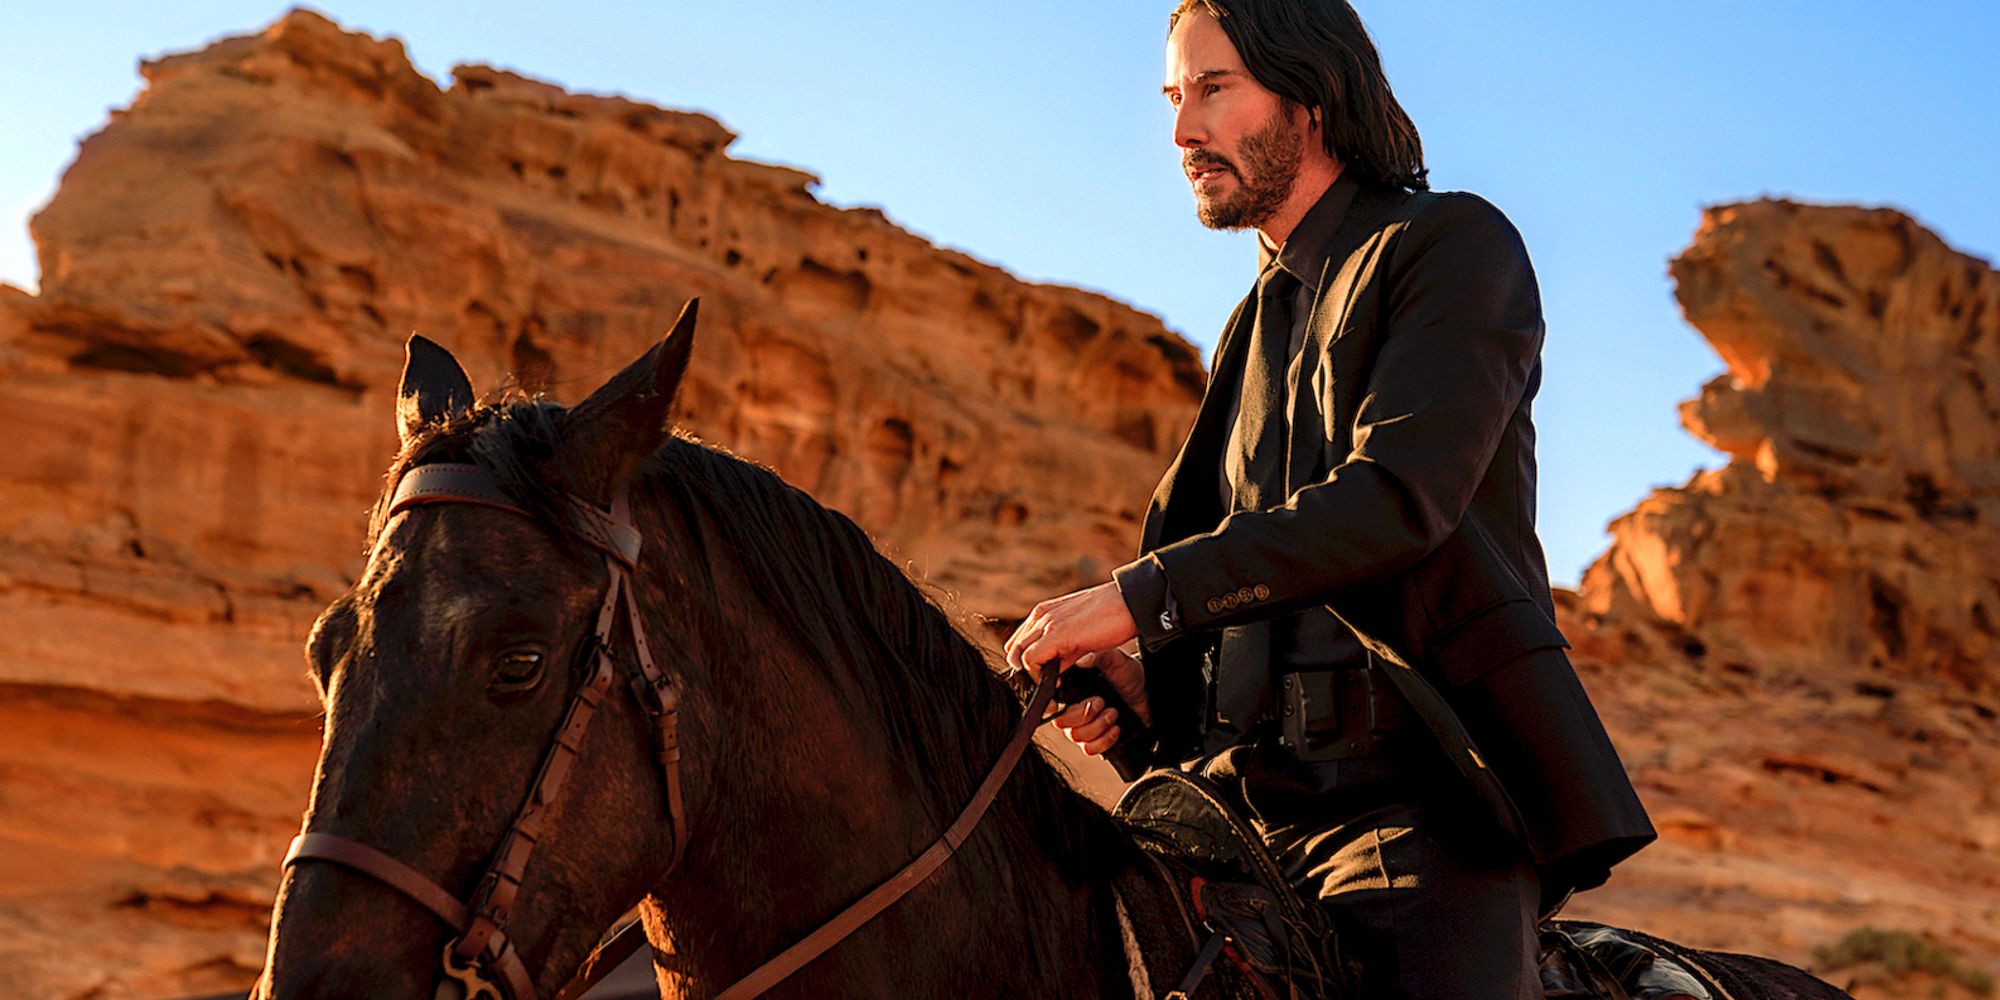 Keanu Reeves riding a horse in John Wick 4